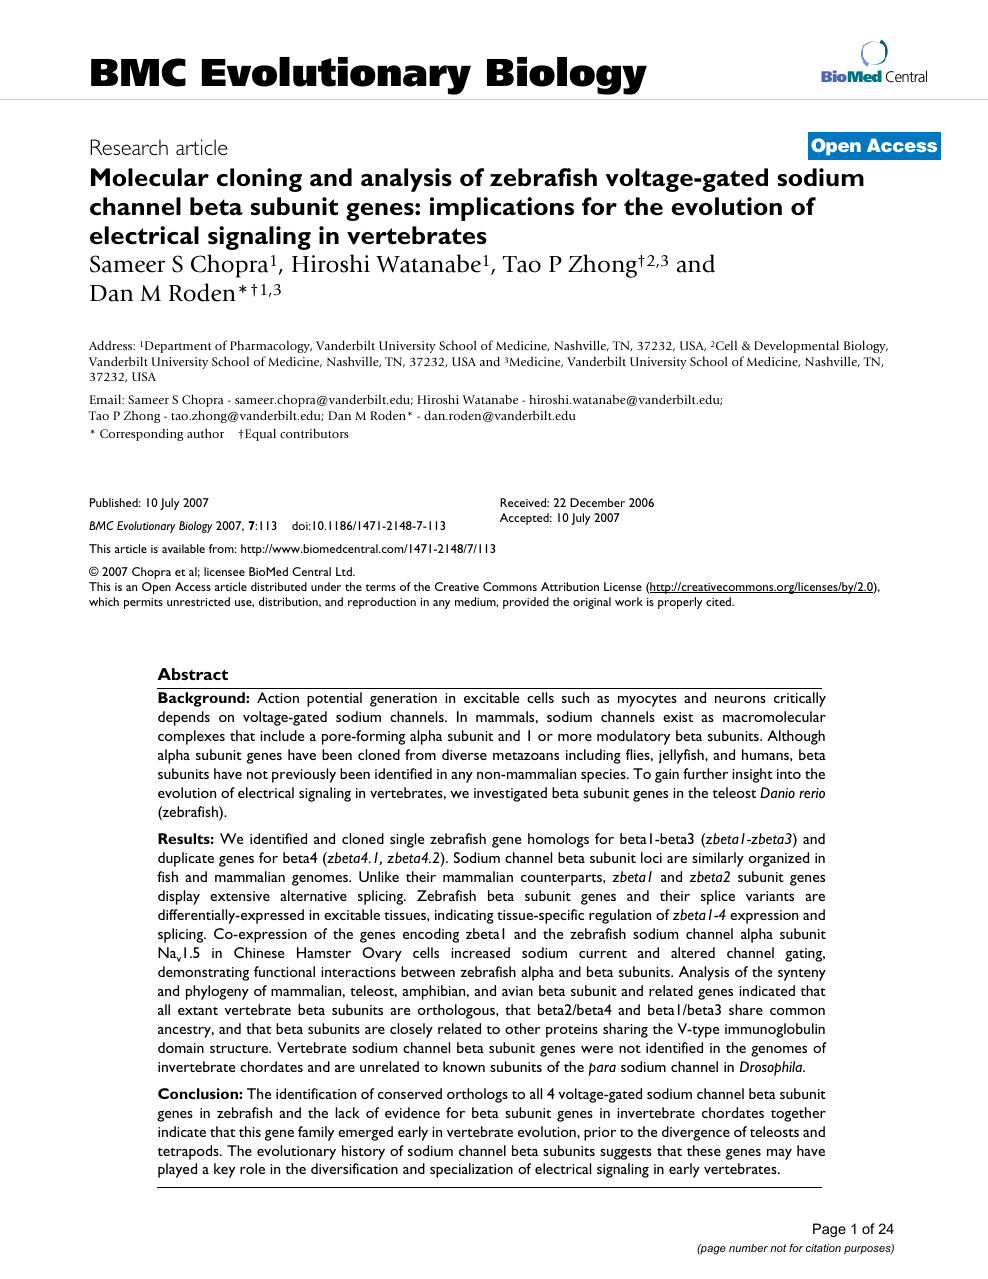 Molecular Cloning And Analysis Of Zebrafish Voltage Gated Sodium Channel Beta Subunit Genes Implications For The Evolution Of Electrical Signaling In Vertebrates Topic Of Research Paper In Biological Sciences Download Scholarly Article